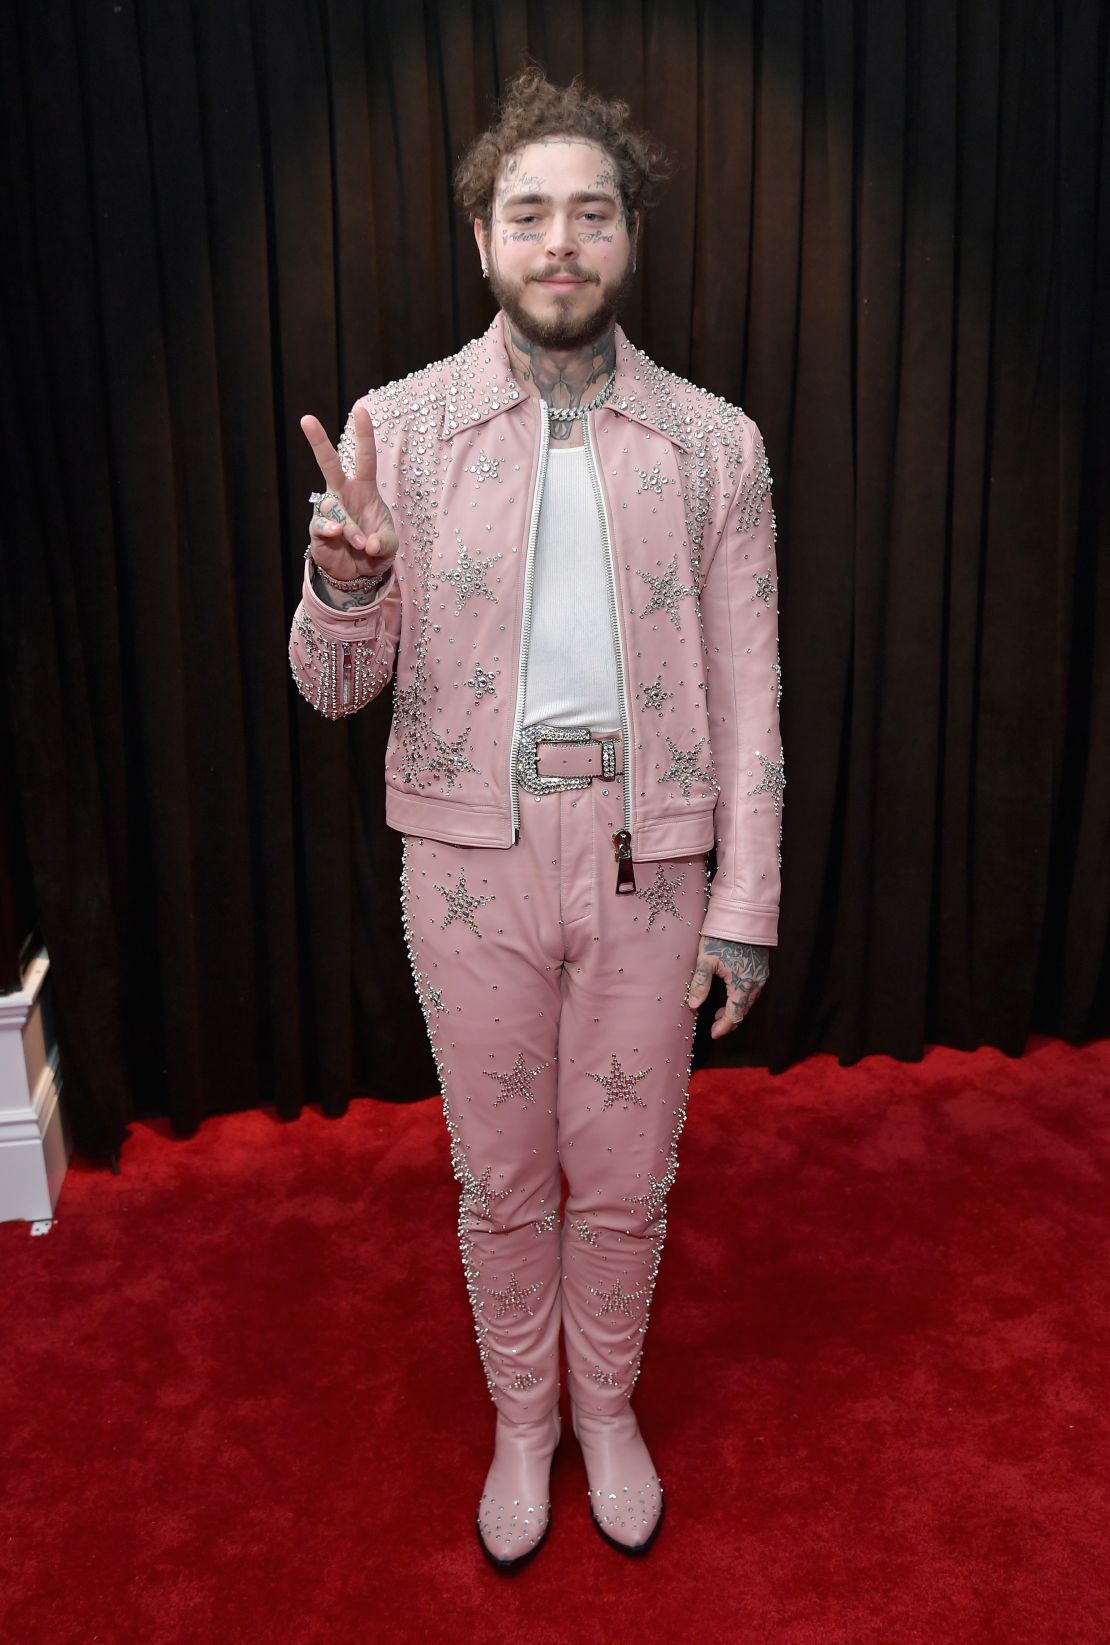 Post Malone attends the 61st Annual Grammy Awards in February wearing a rhinestone-covered leather suit.